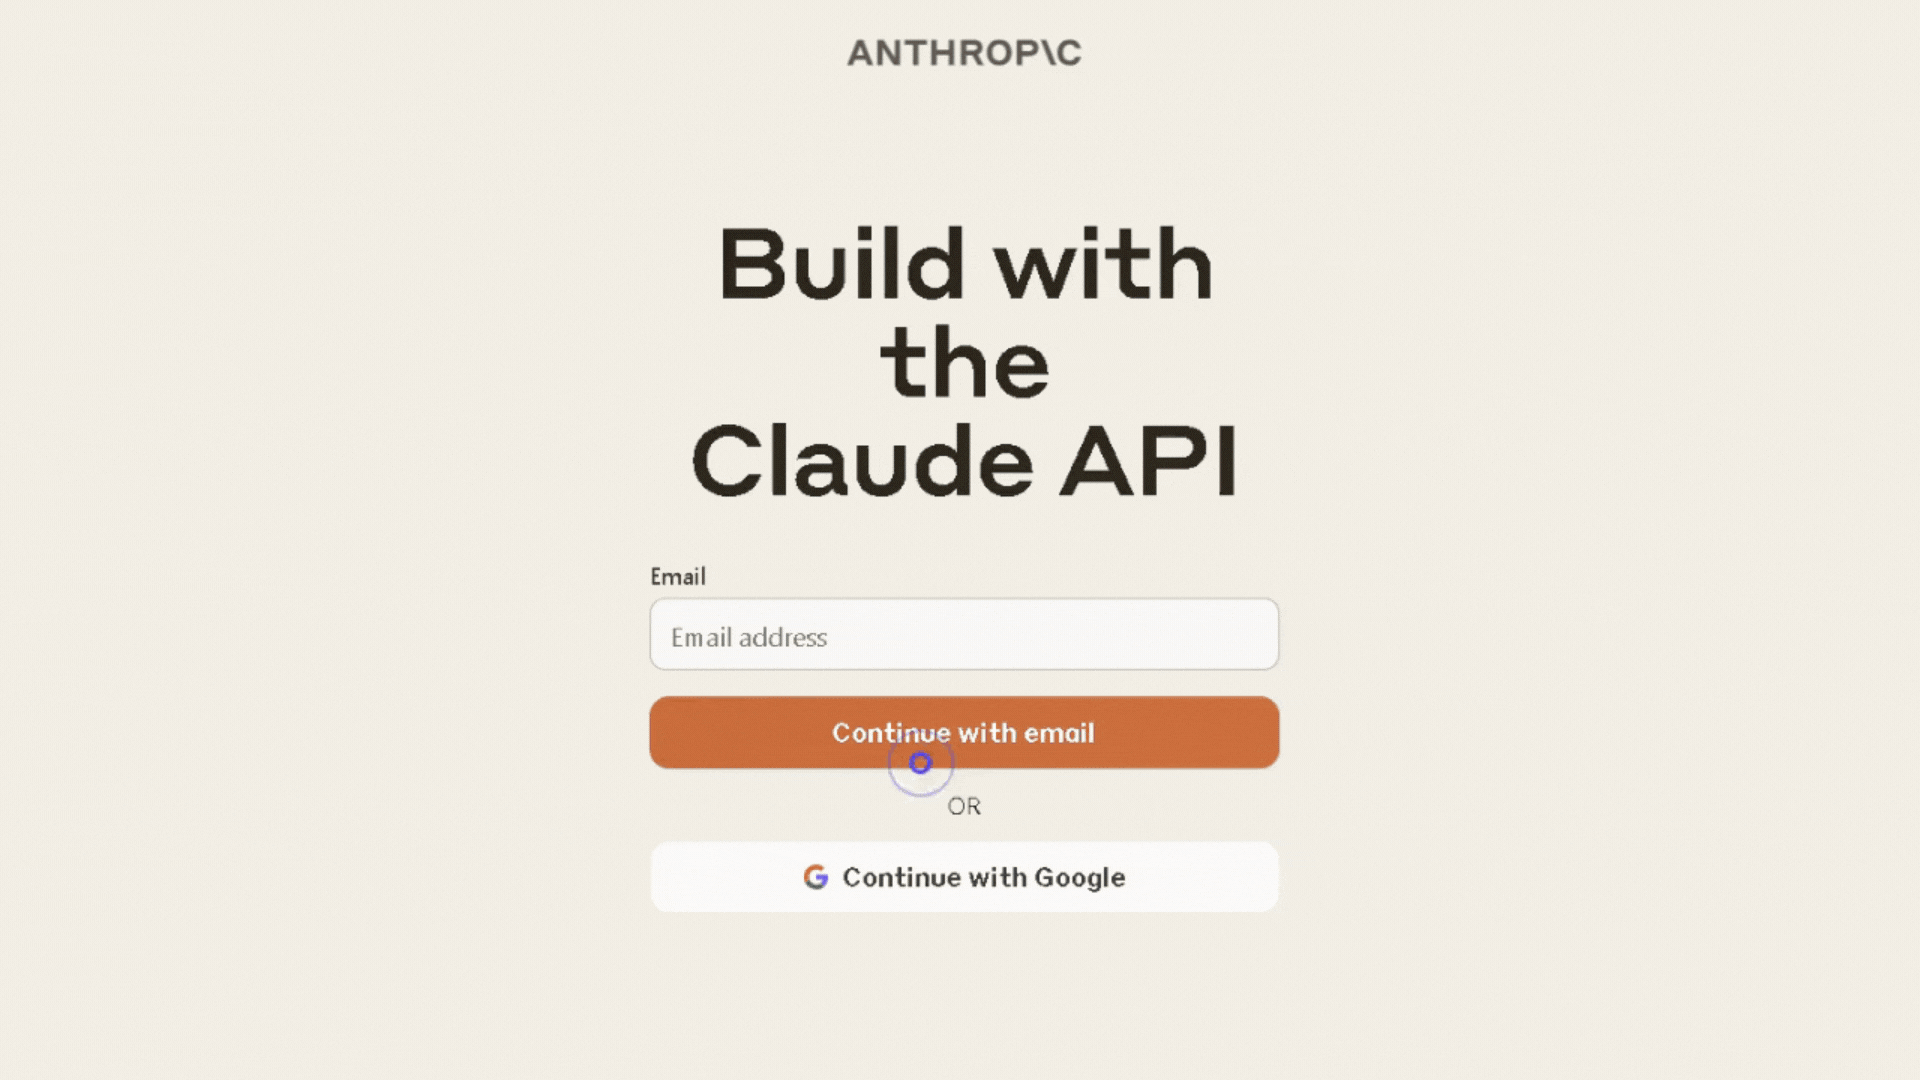 Image of signup form for Anthropic's Claude API, with options to continue with email or Google account